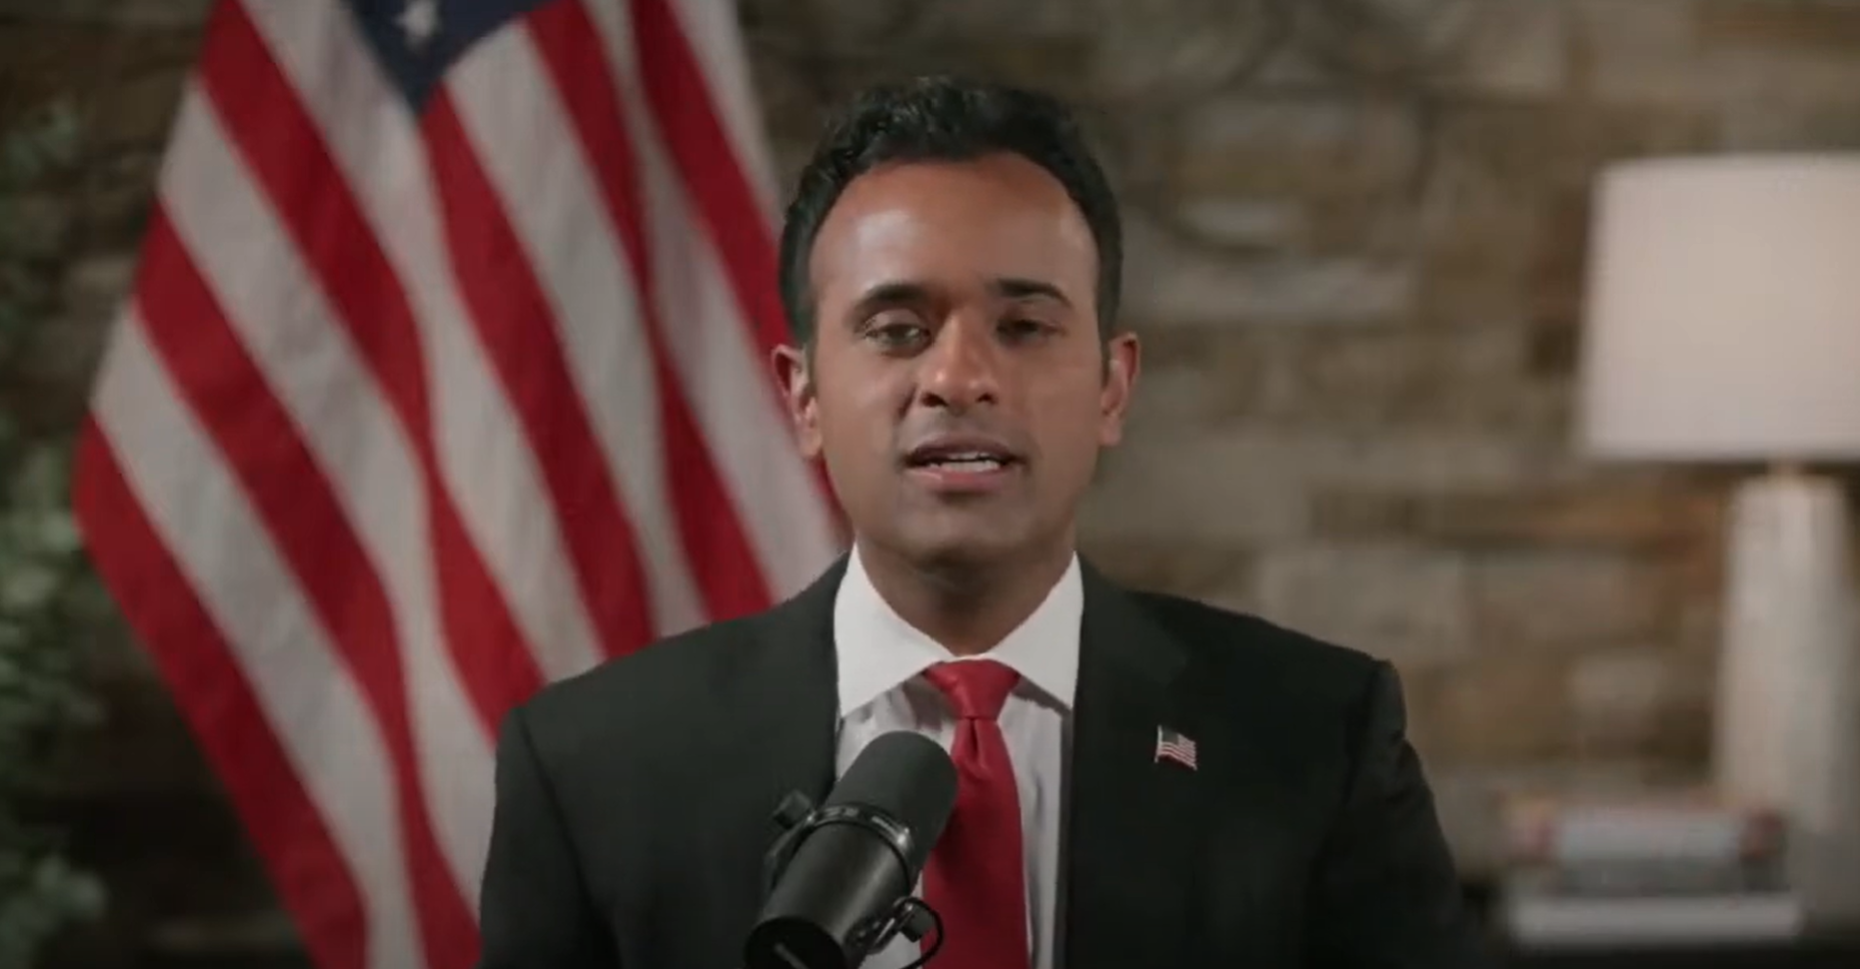 Vivek Ramaswamy Sinks to New Low: 60% of South Carolina Voters Won’t Vote for Him ‘Under Any Circumstances’